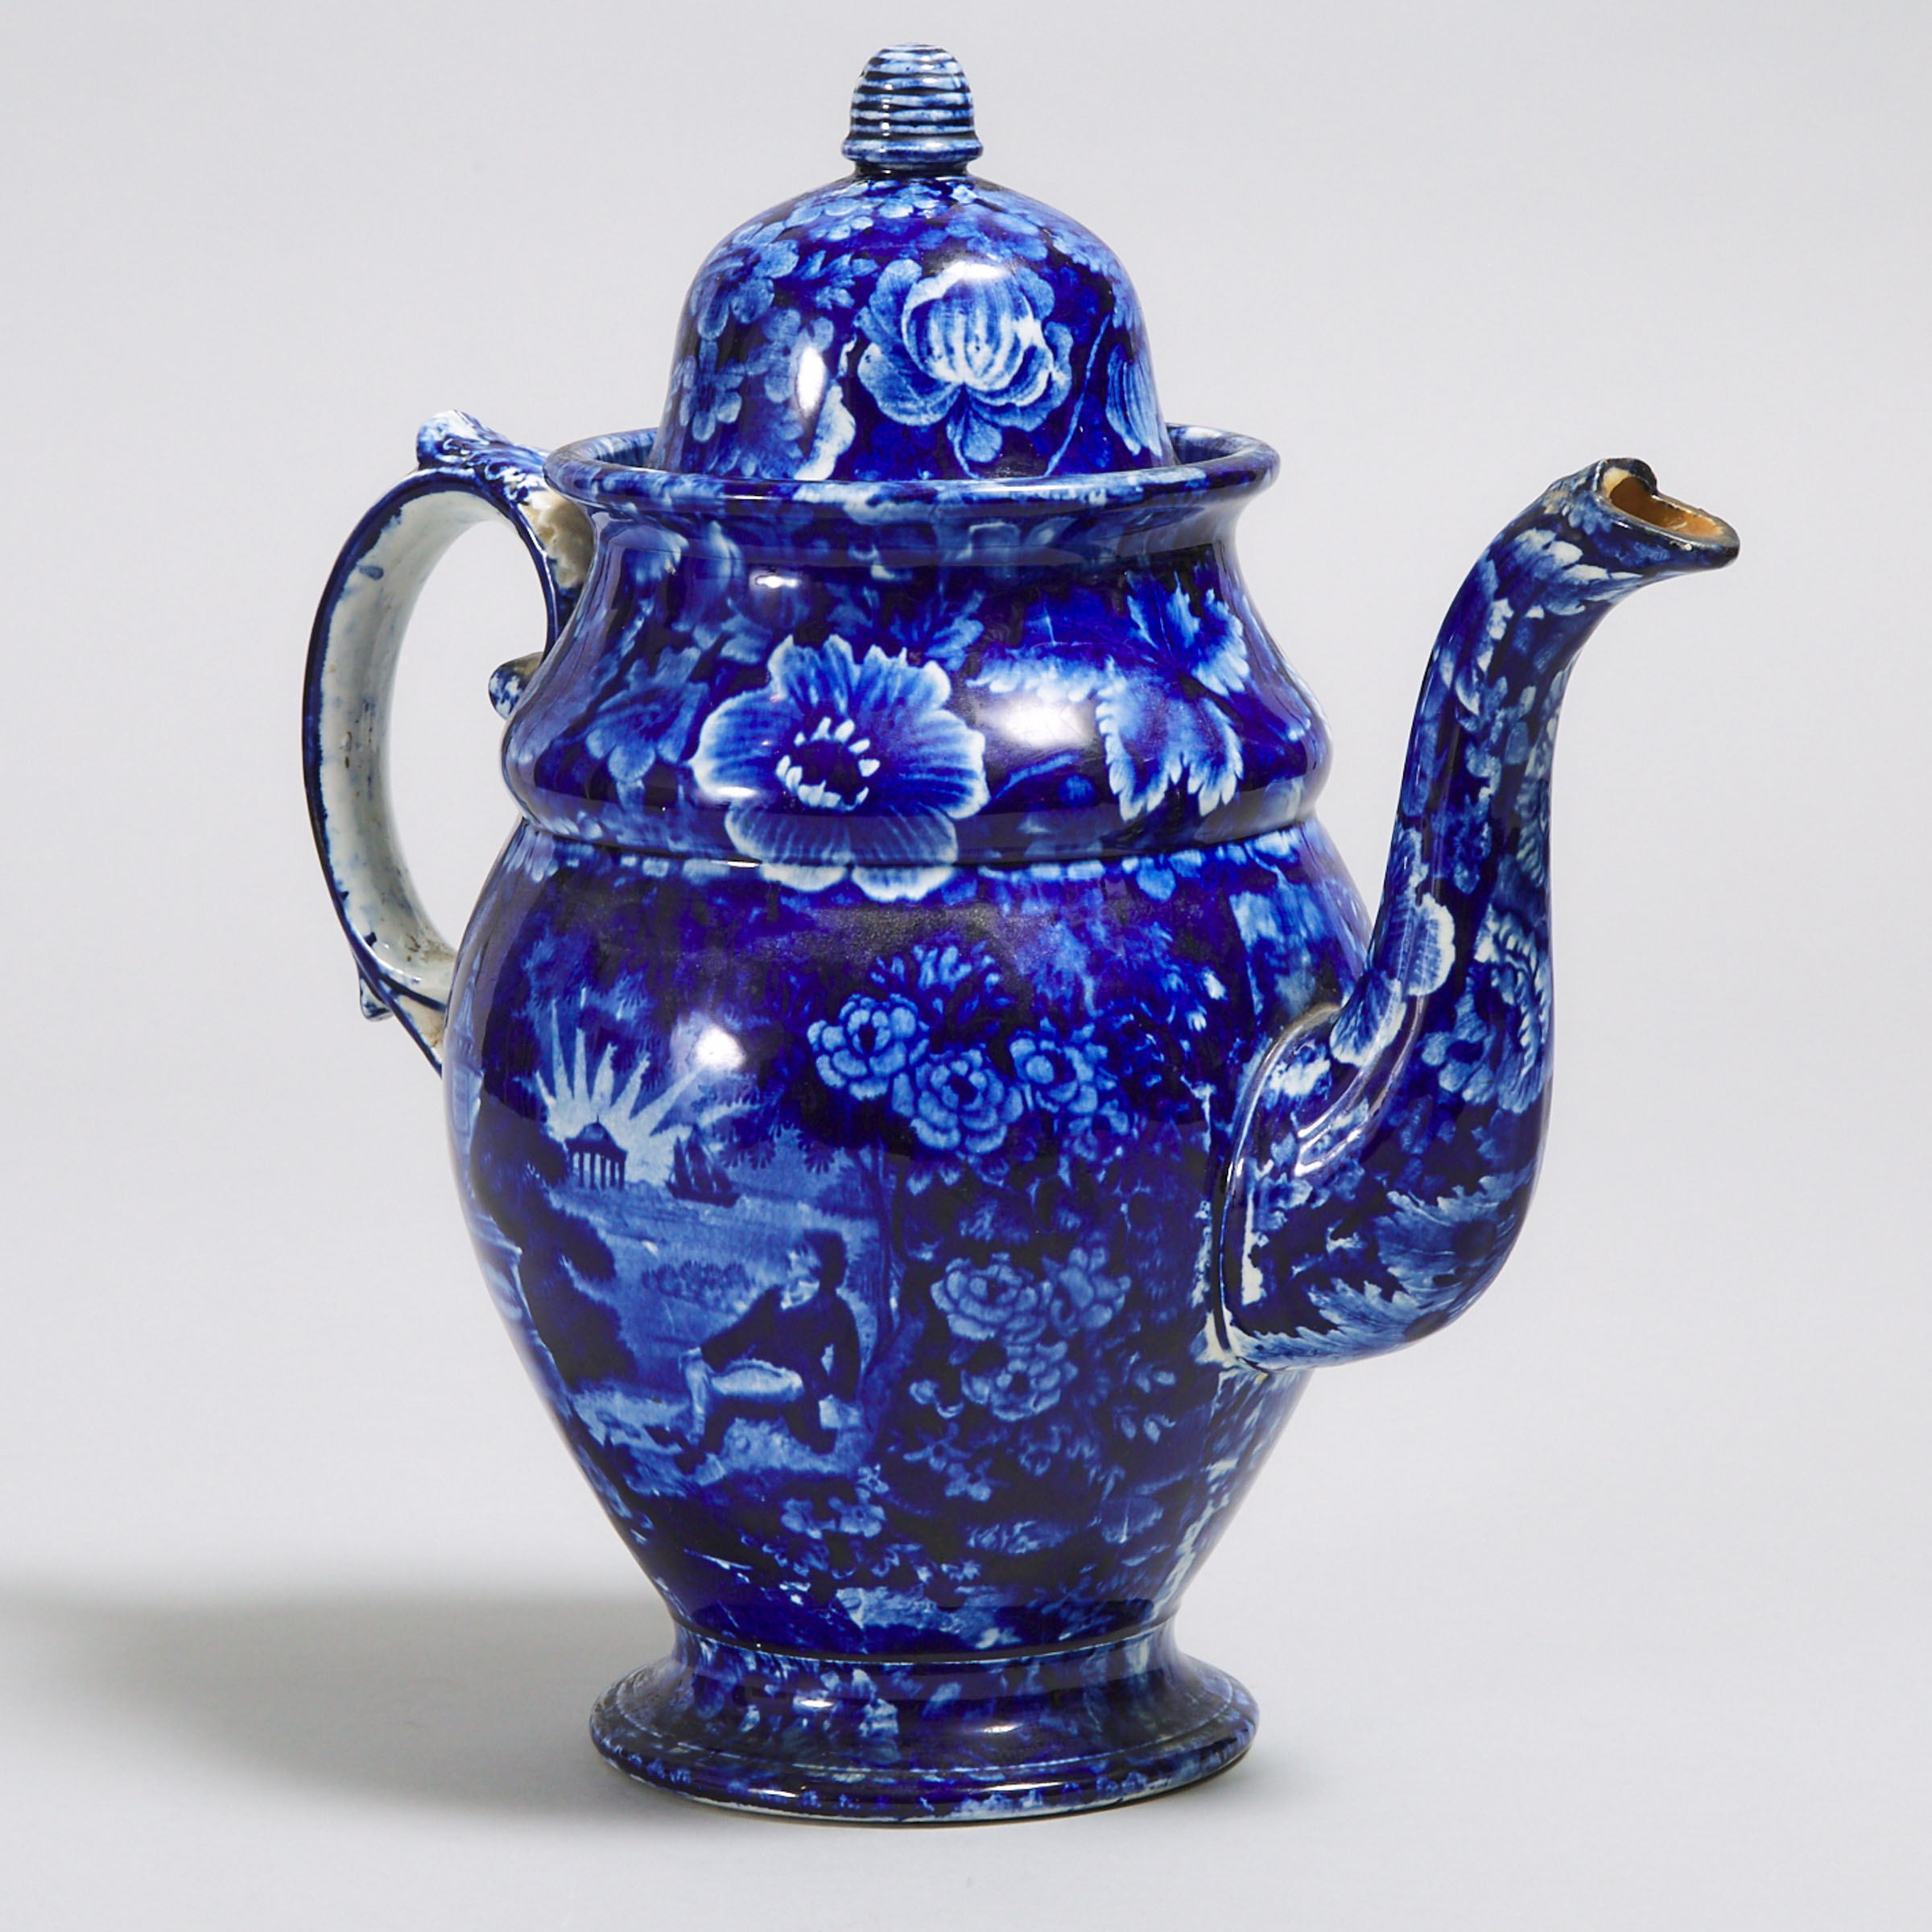 Staffordshire Blue-Printed Pearlware Coffee Pot, 'Lafayette at Franklin's Tomb', c.1830